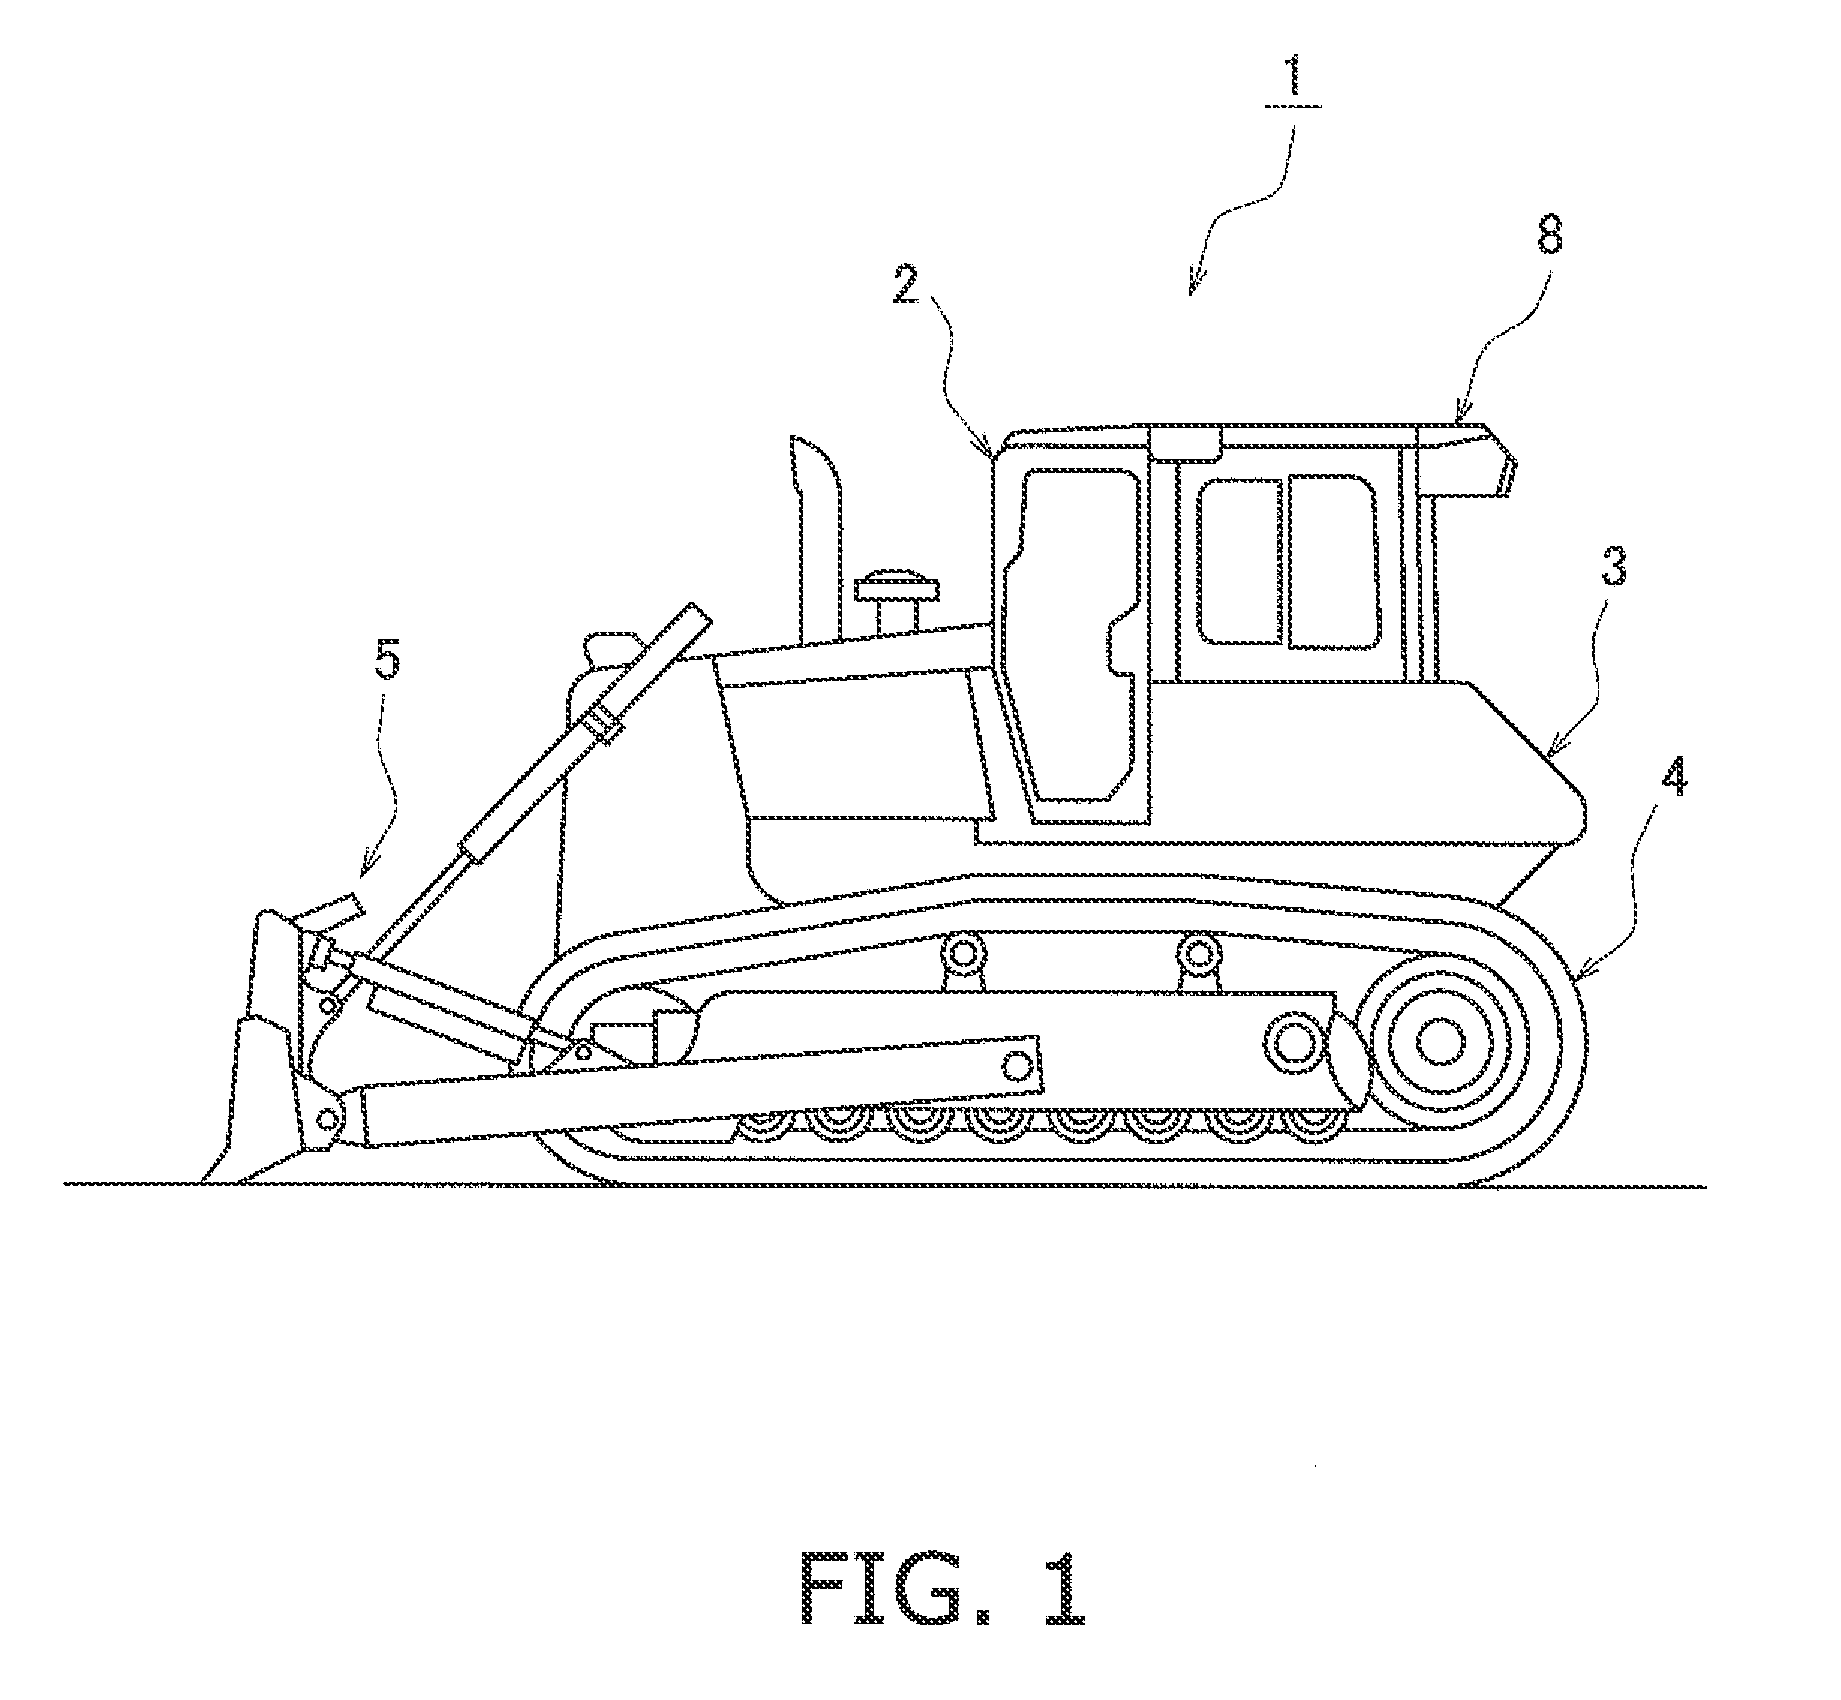 Work vehicle equipped with rear monitoring camera apparatus